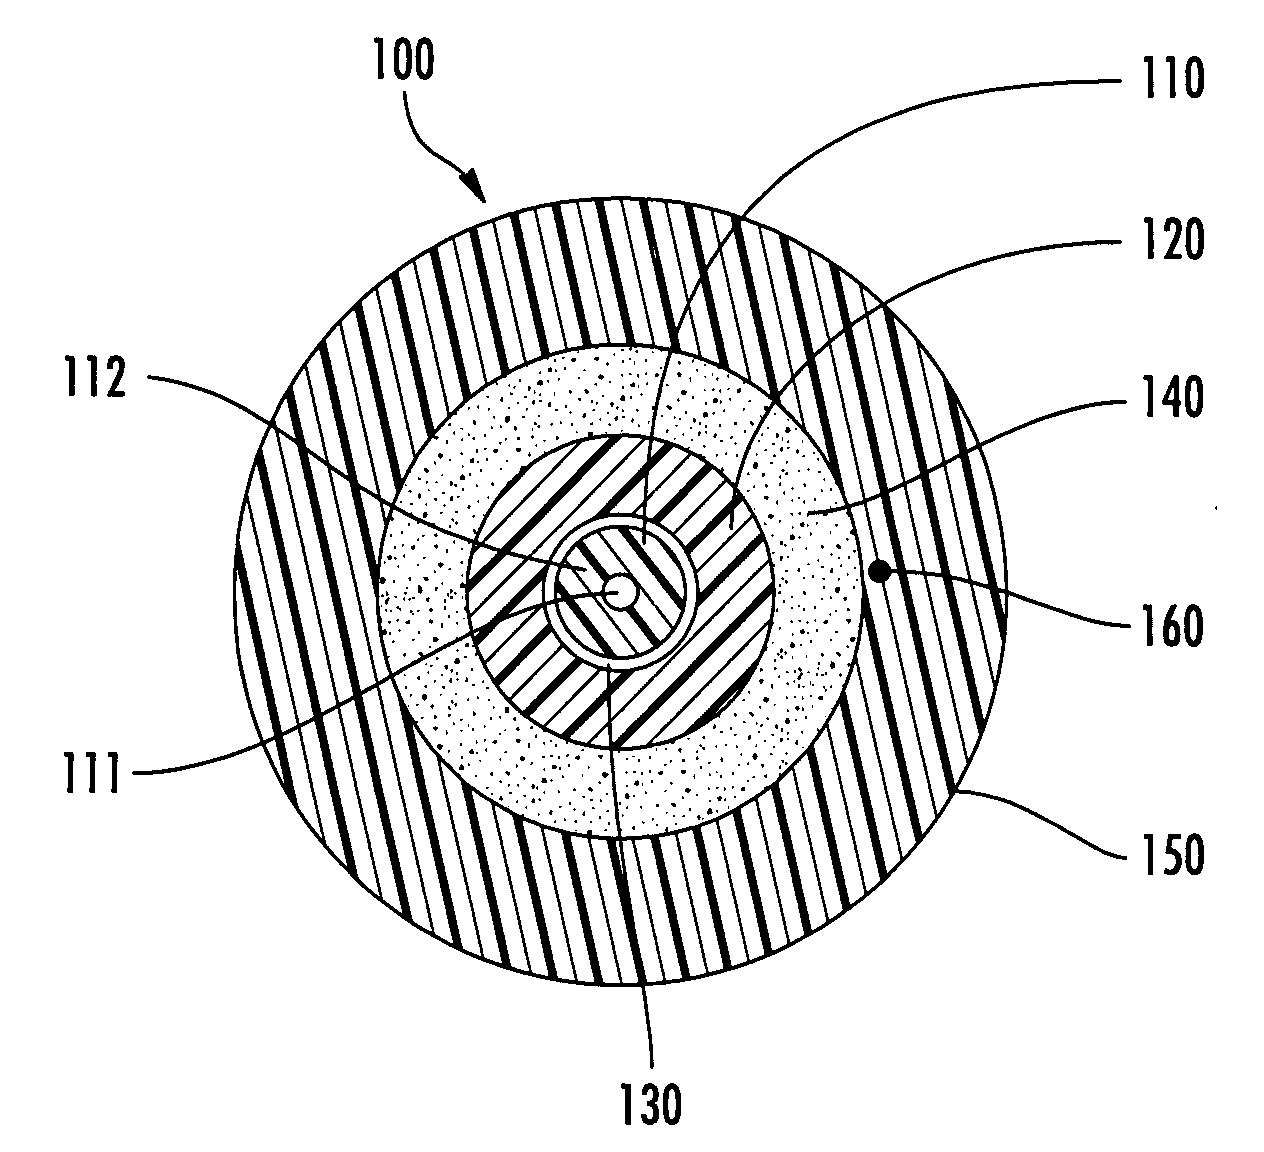 Optical cable and method of manufacturing an optical cable